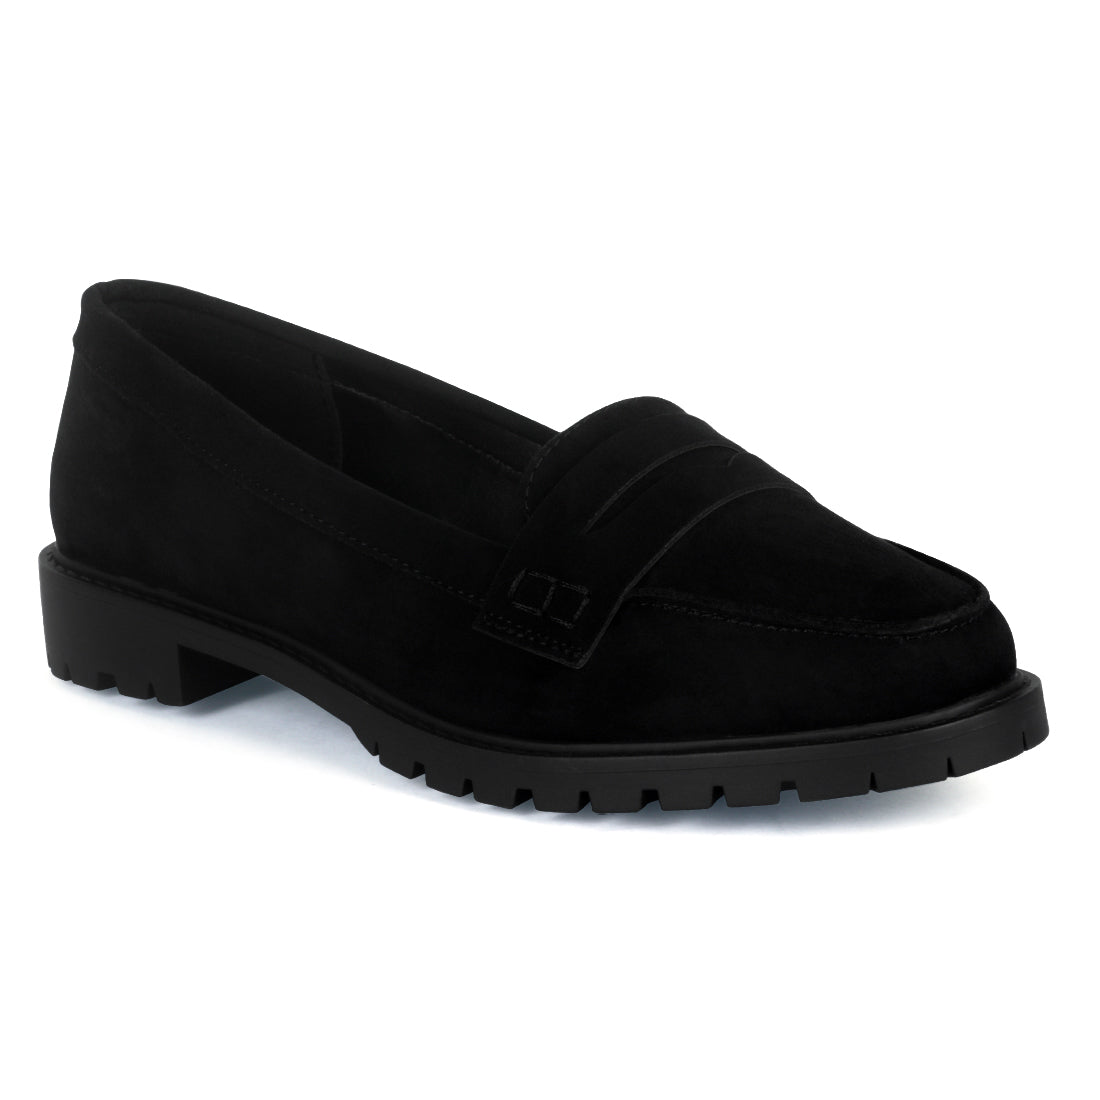 Chunky Loafers for women - Black